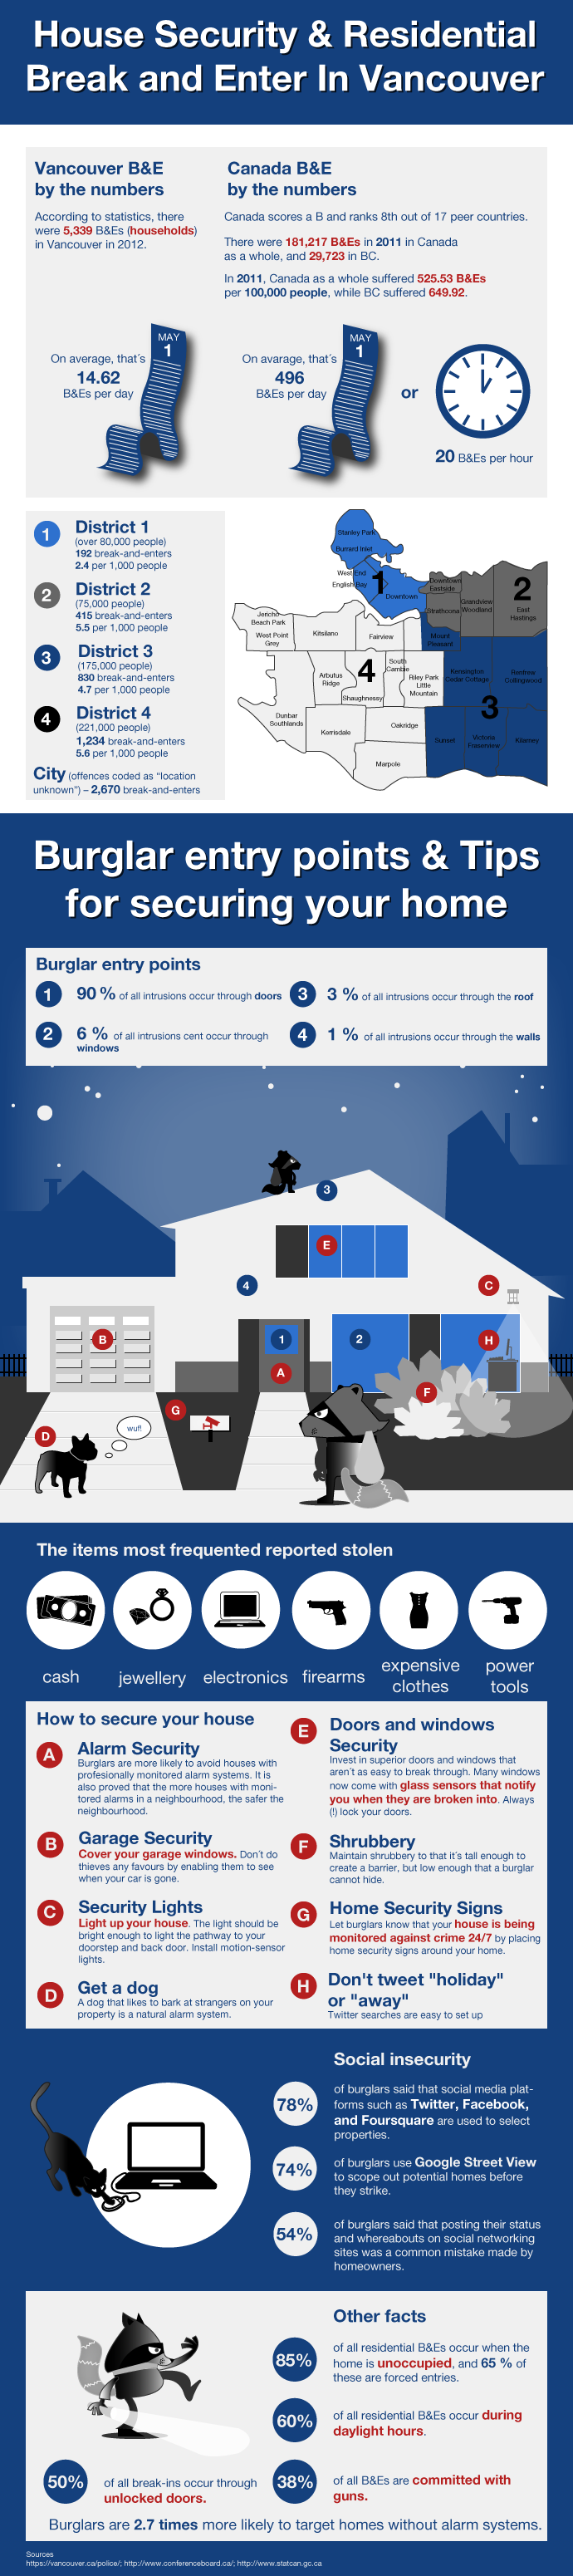 House Security Residential Break and Enter in Vancouver infographic